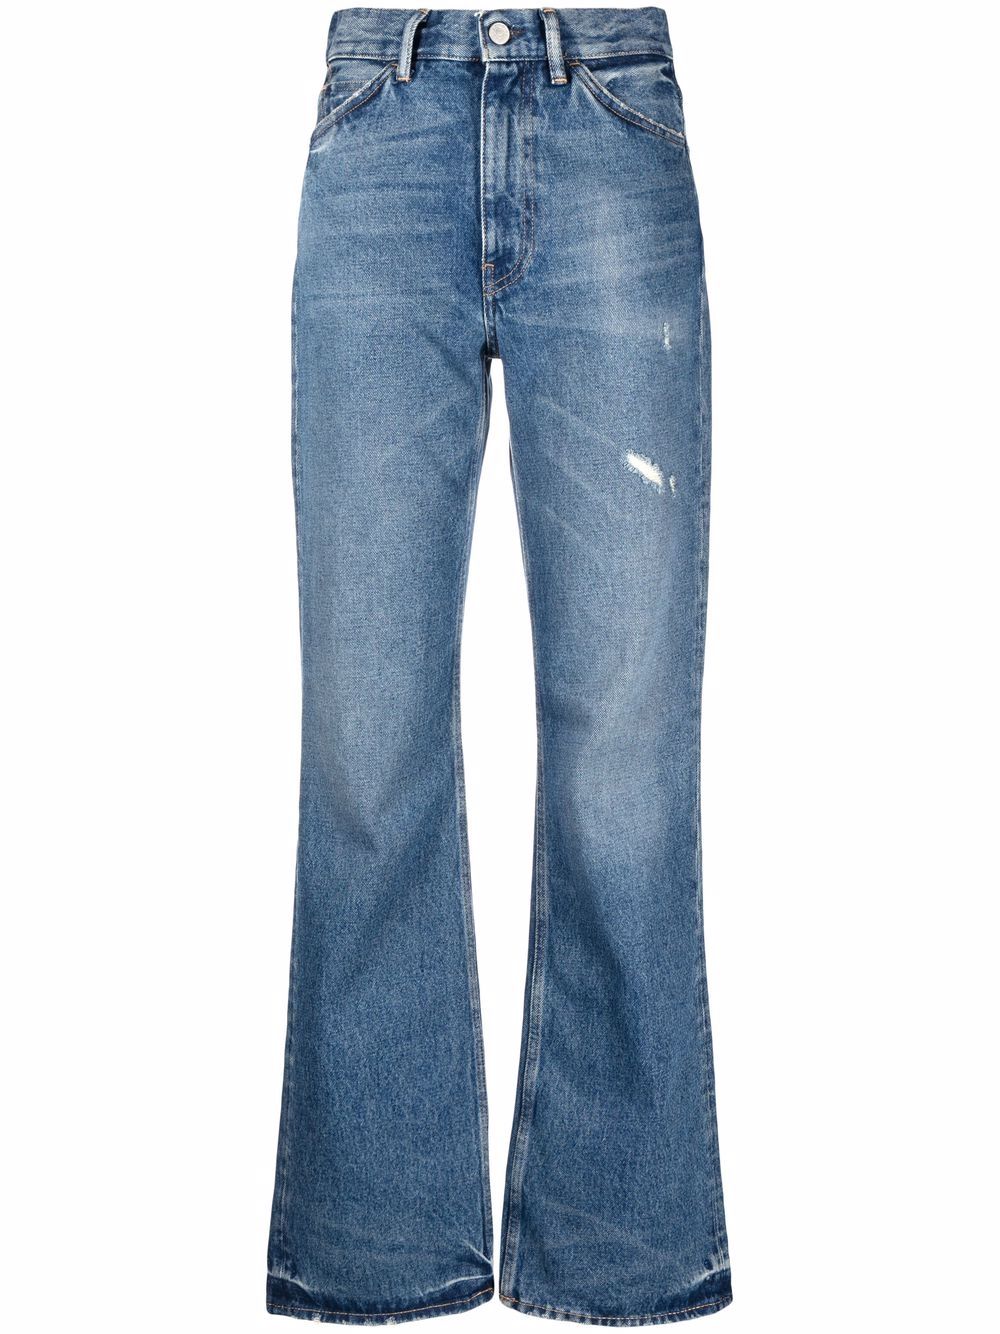 Faded blue organic cotton 1977 regular-fit jeans